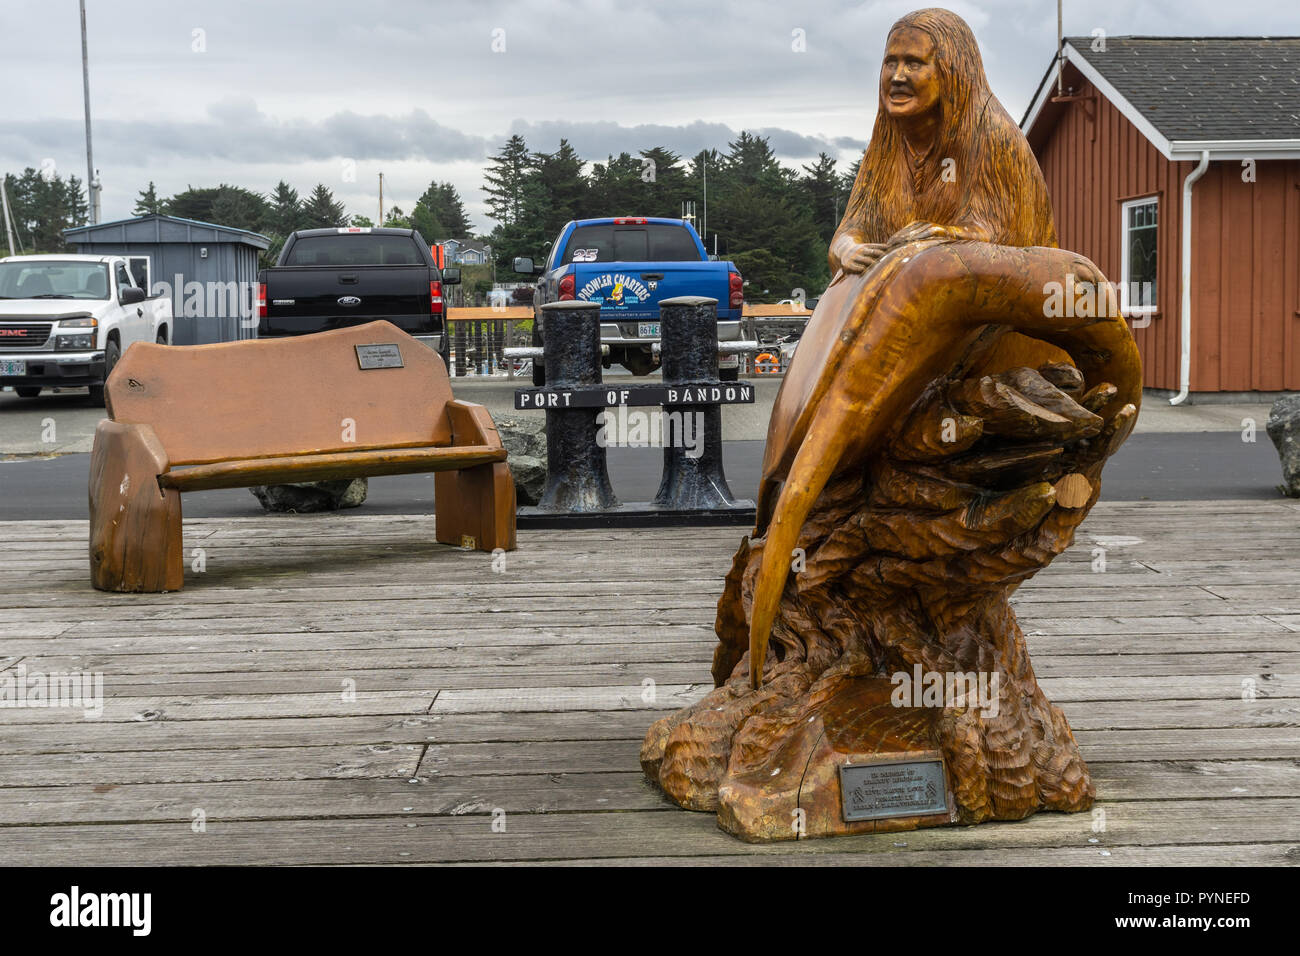 Port of old Bandon dock with wooden artworks, Oregon, USA. Stock Photo